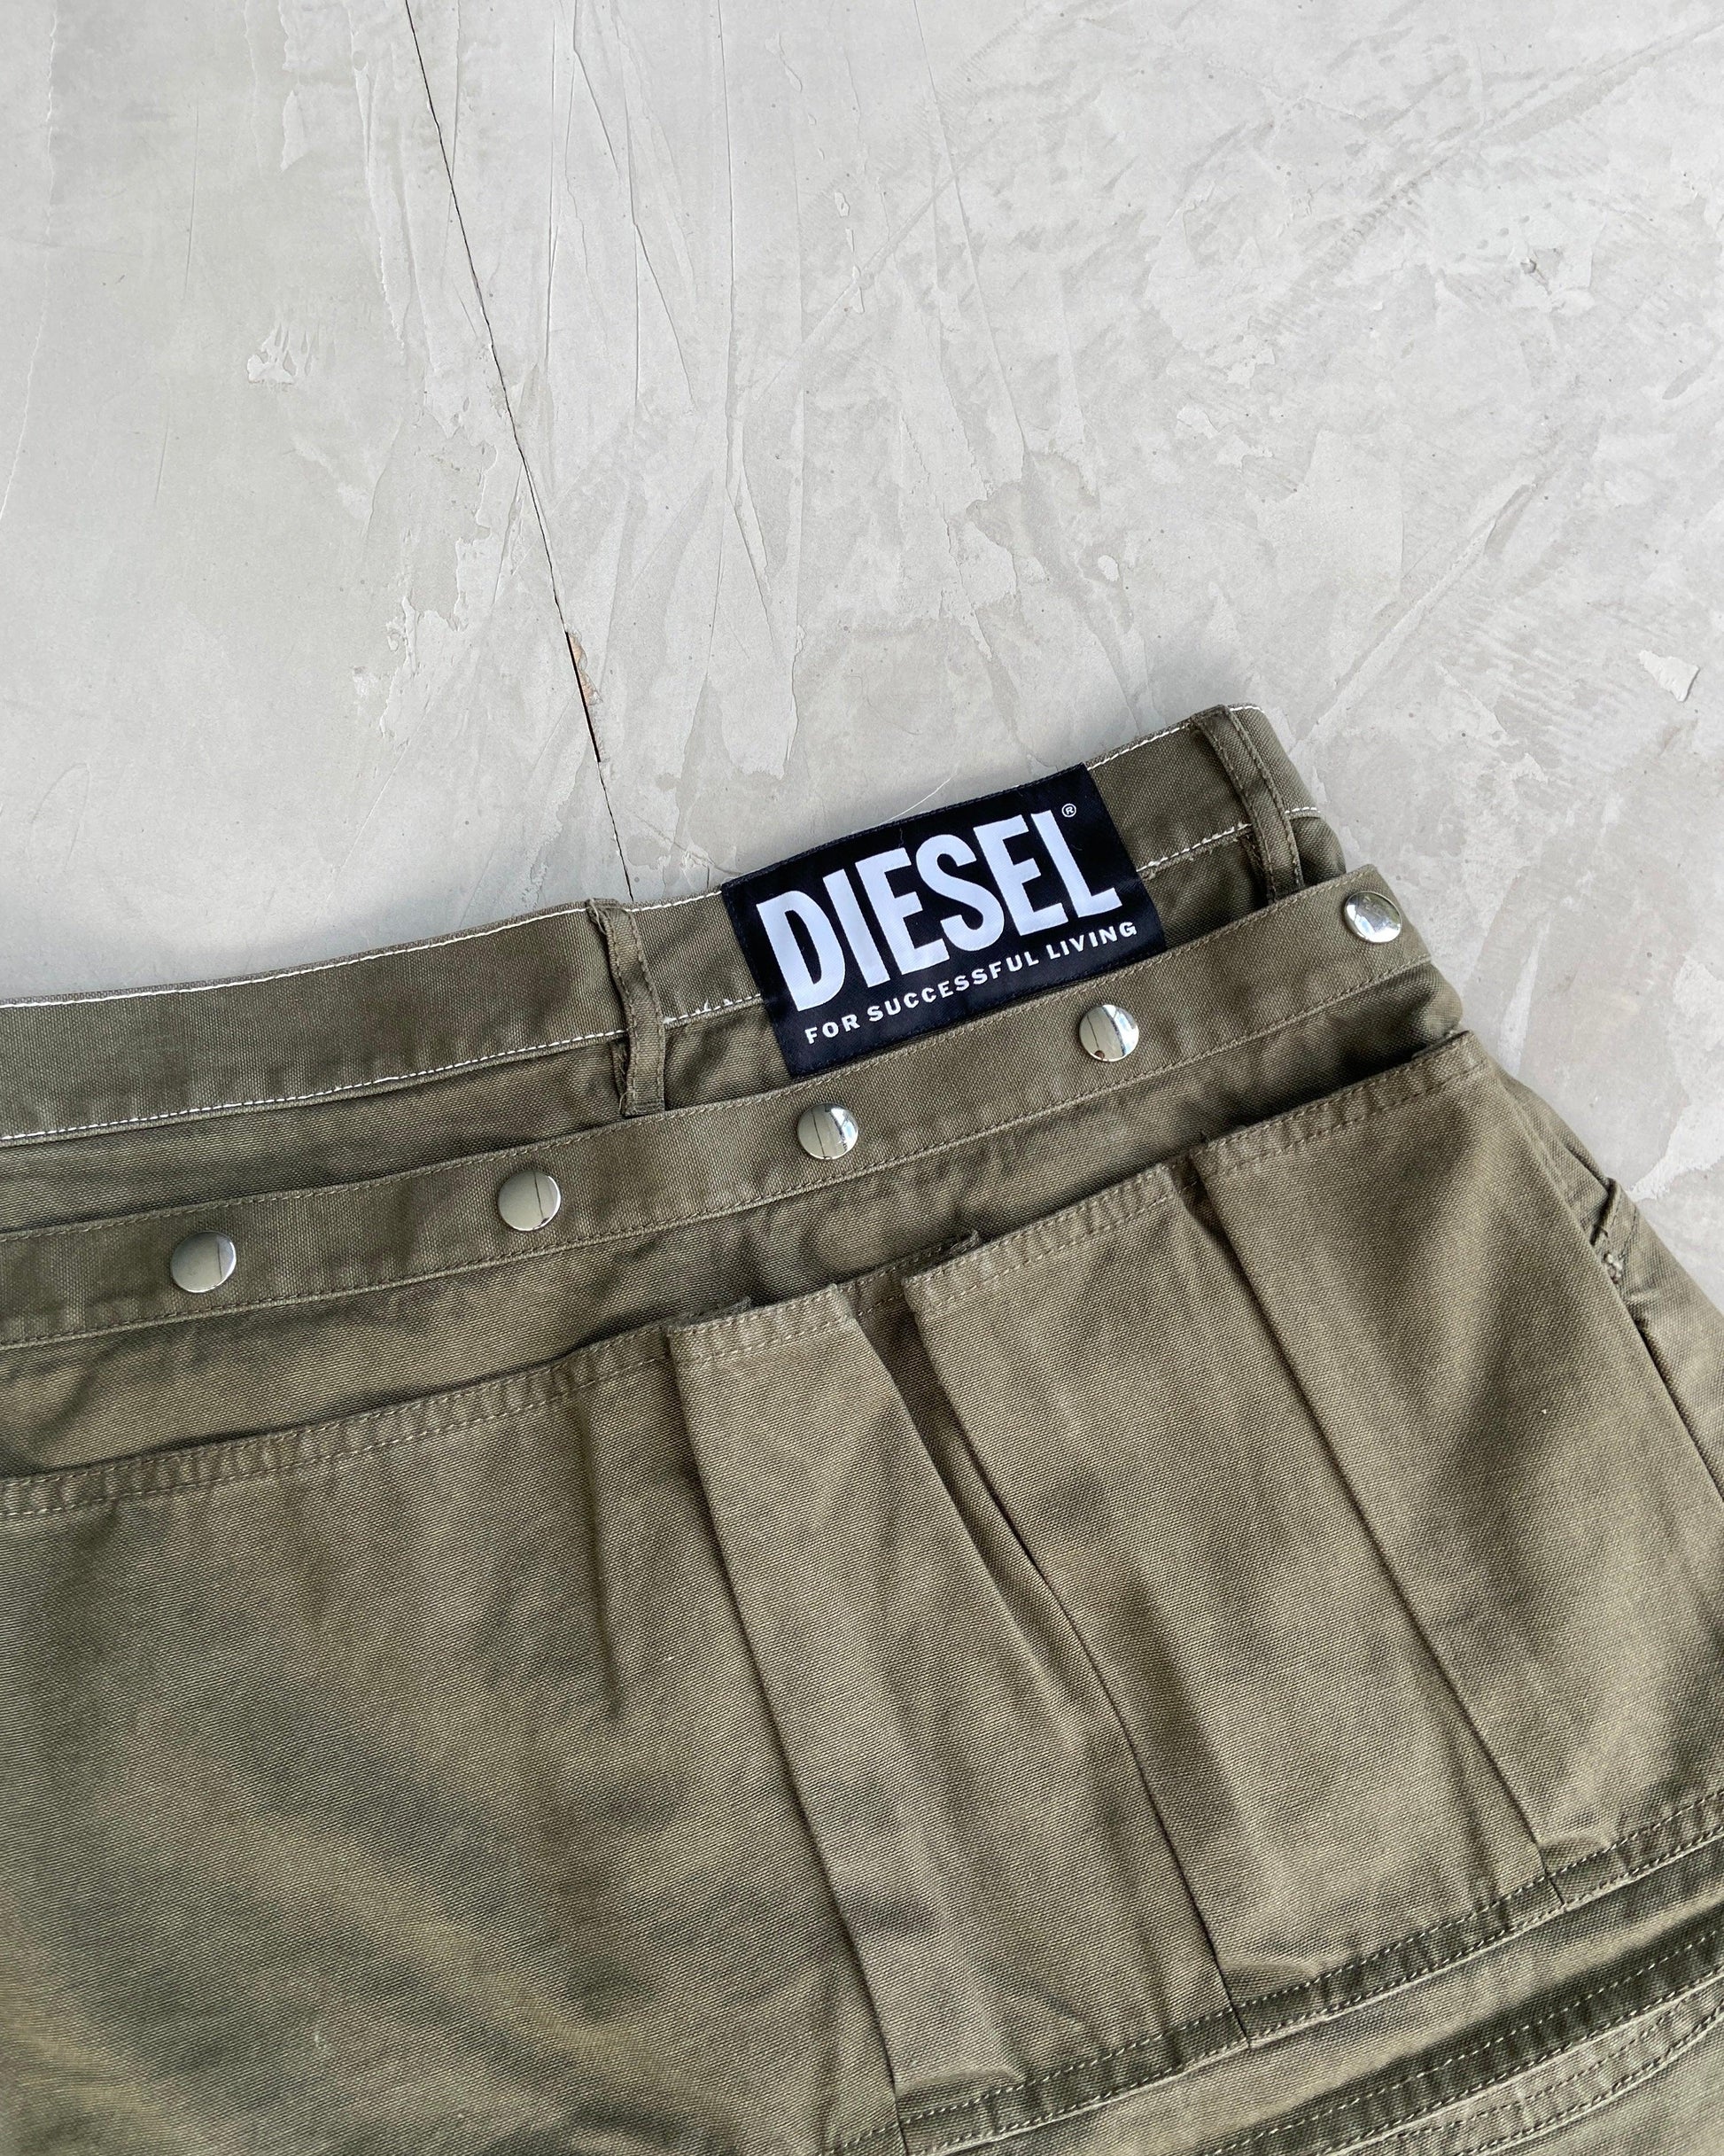 DIESEL REMOVABLE CARGO MINI SKIRT - W28" - Known Source